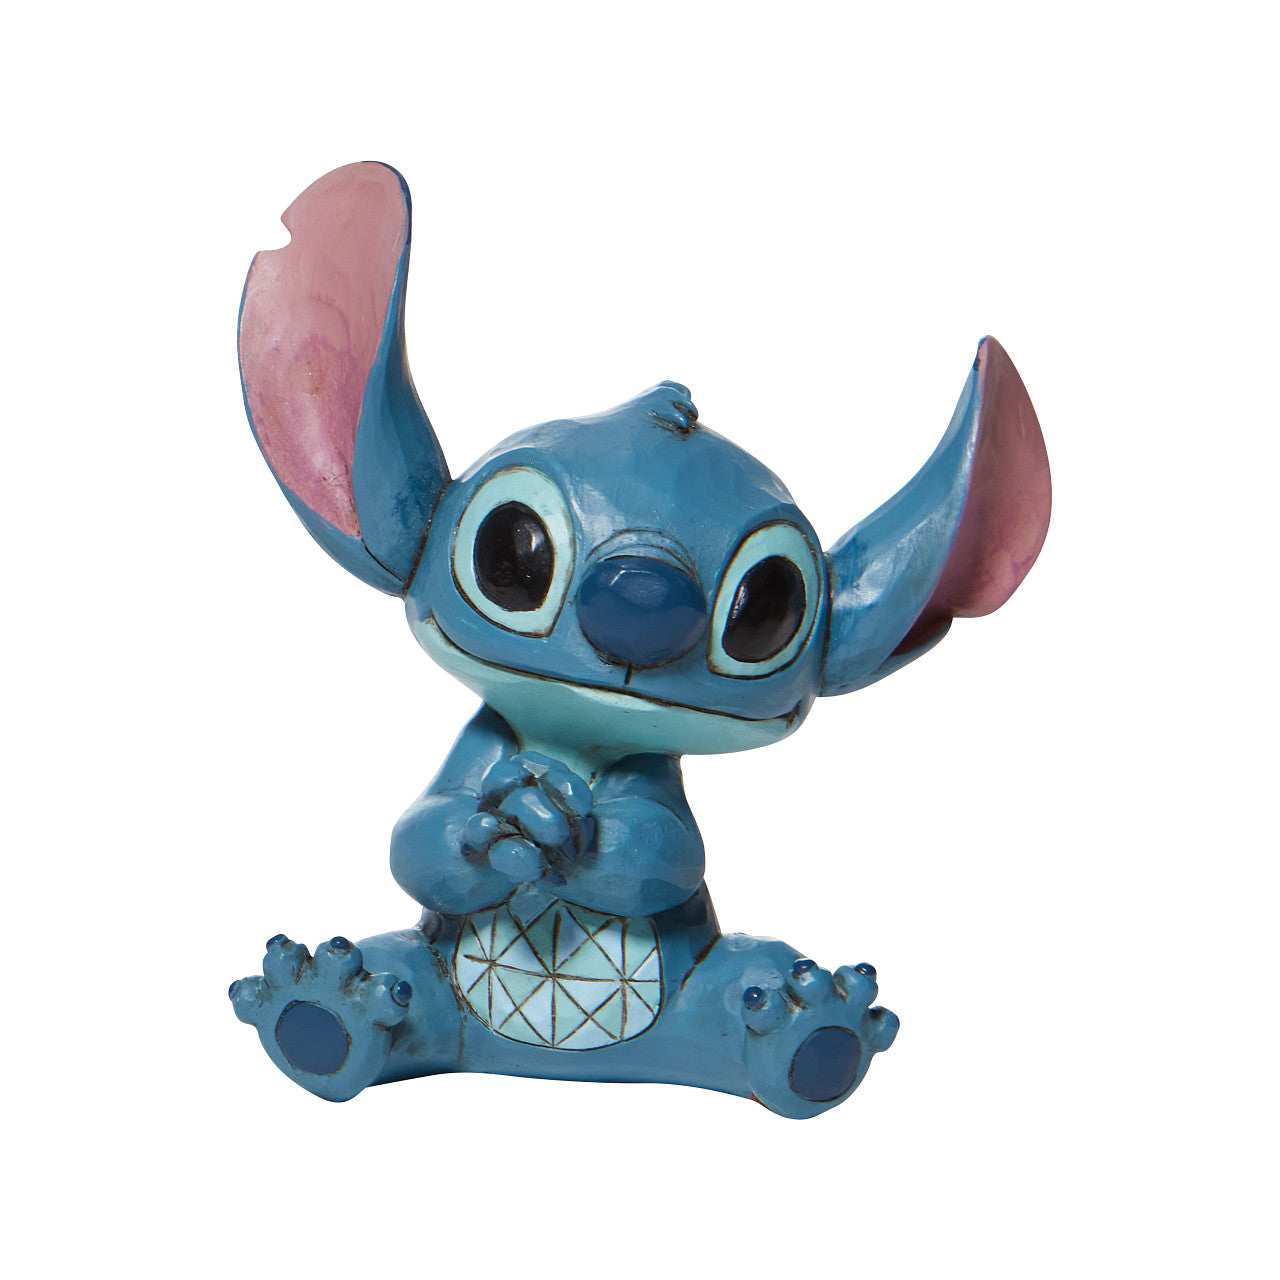 Jim Shore Stitch Mini Figurine  Everyone's favorite alien, Stitch, looks extra adorable in this mini figurine by Jim Shore. Hands clasped, the temperamental alien appears soothed in this figurine, one can only imagine he's listening to Elvis records or watching Lilo hula.